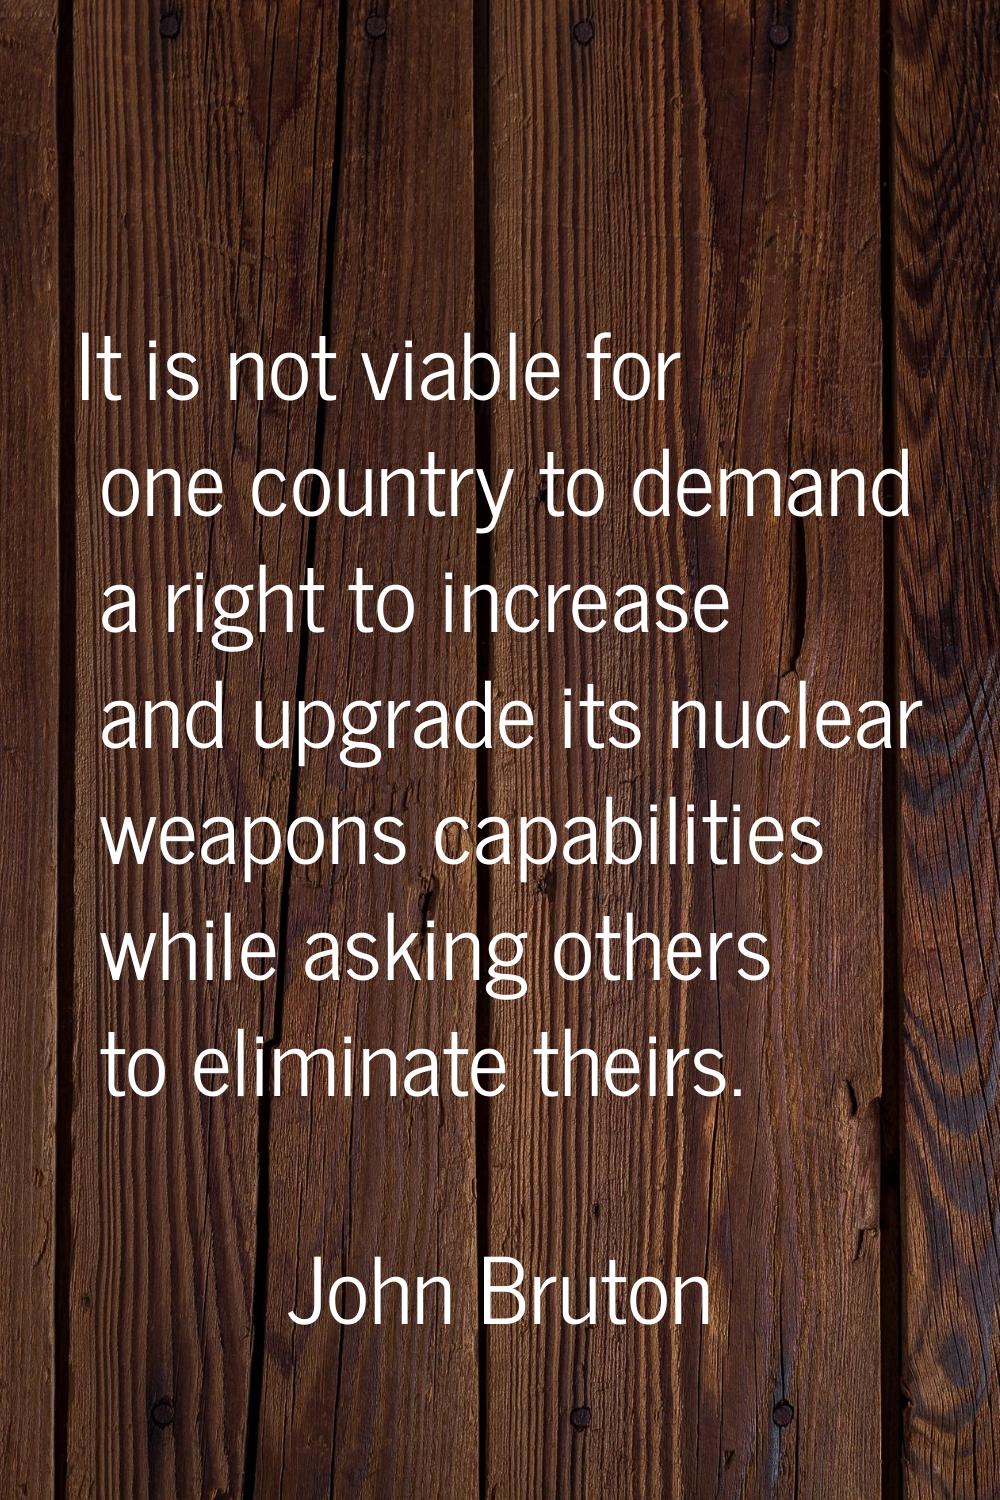 It is not viable for one country to demand a right to increase and upgrade its nuclear weapons capa